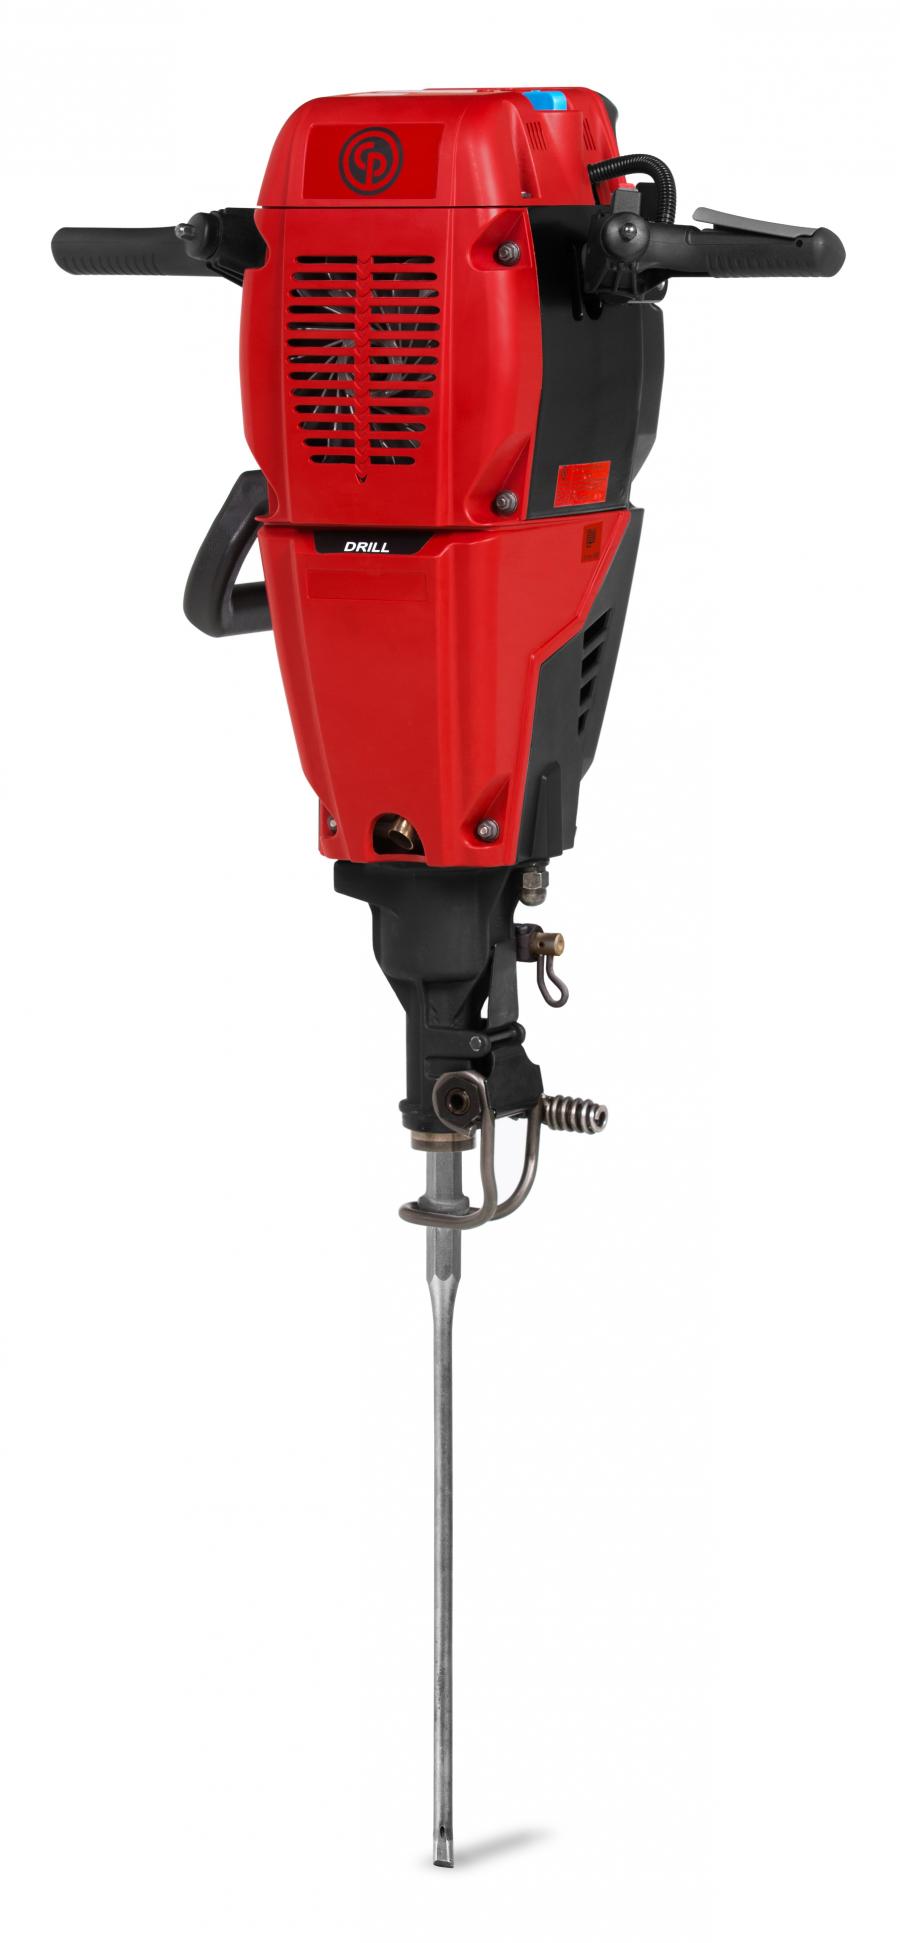 The Red Hawk series provides a solution for jobs that require moving from task to task frequently, as well as remote areas with easy portability.